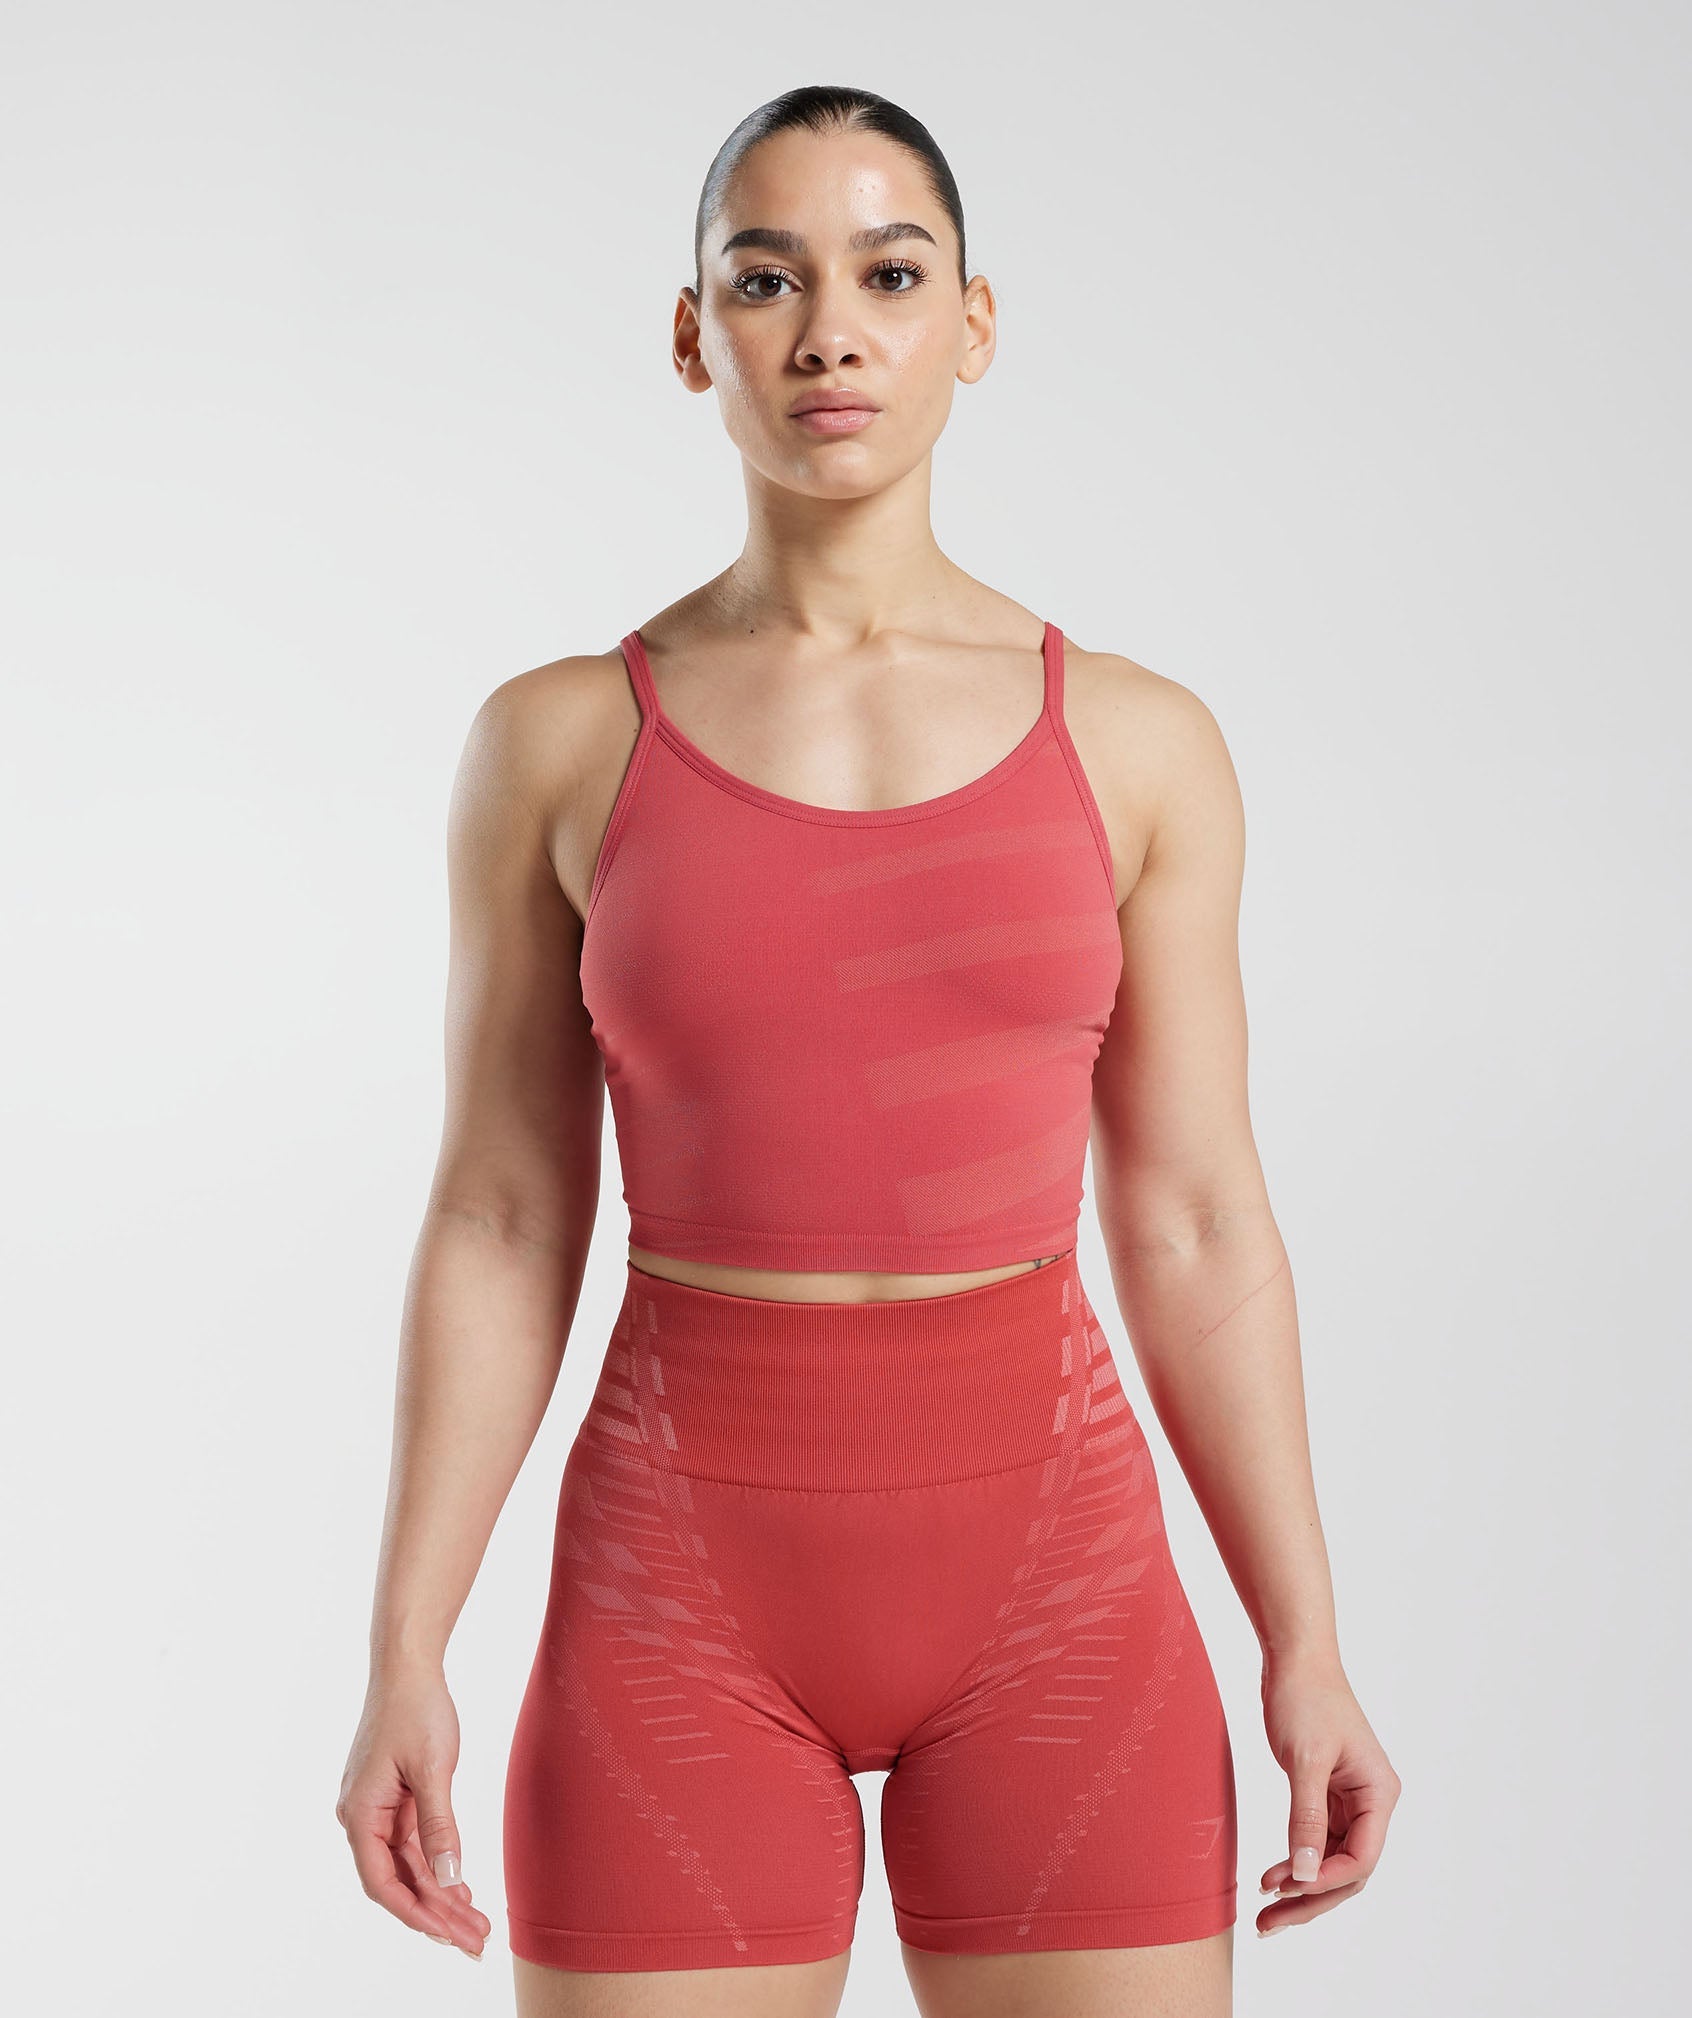 Apex Limit Cami Tank in Light Sundried Red/Terracotta Pink - view 1